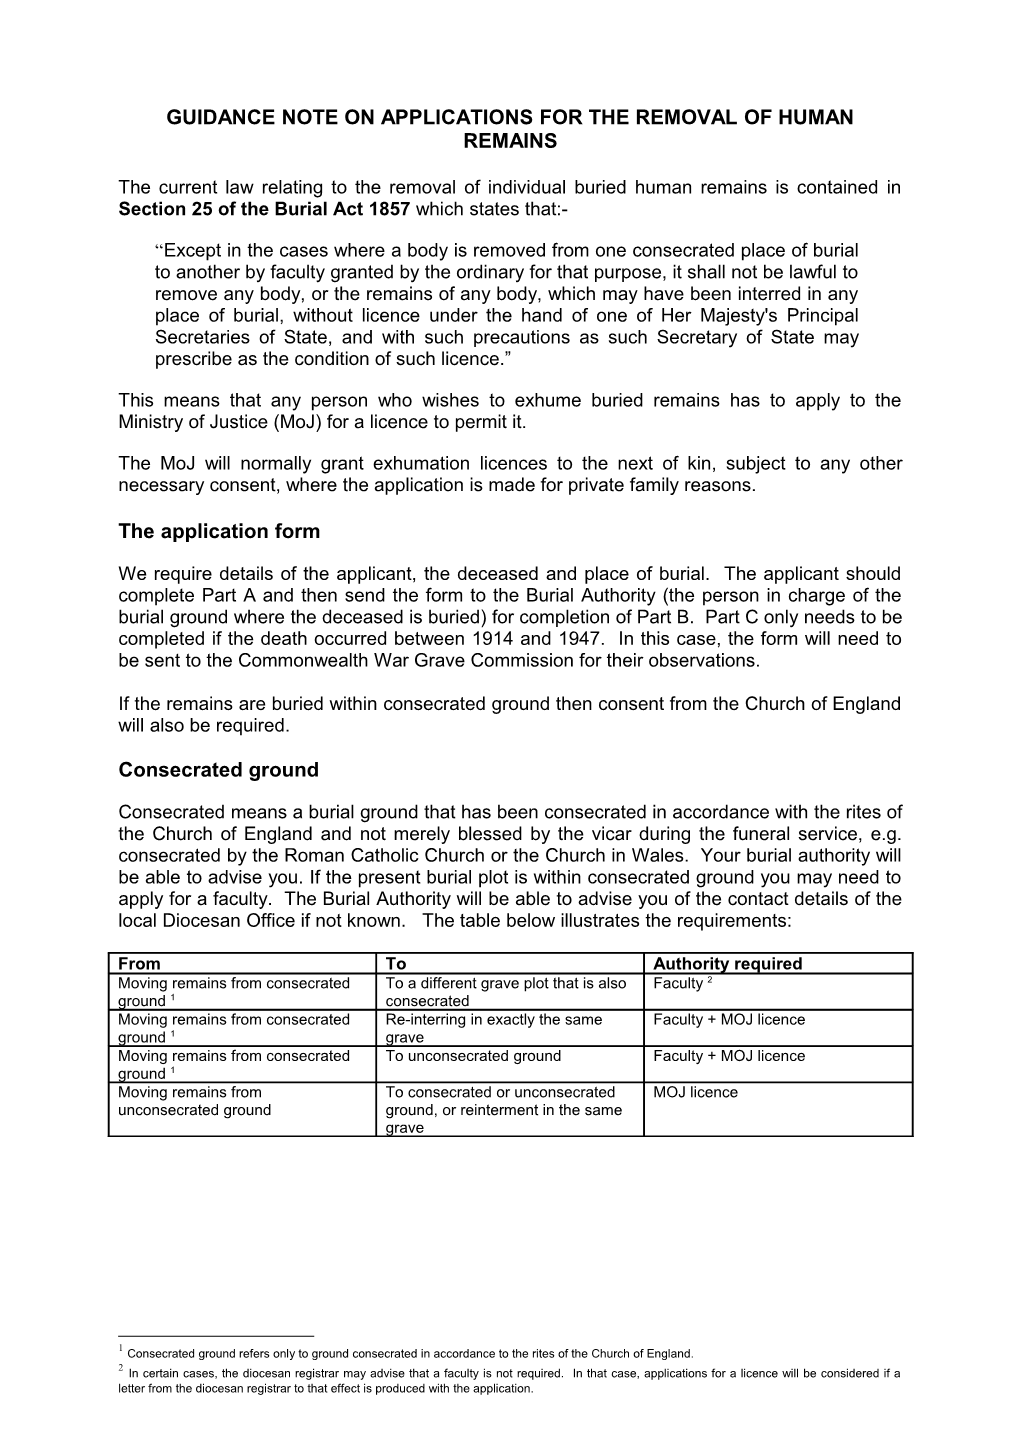 Guidance Note on Applications for the Removal of Human Remains